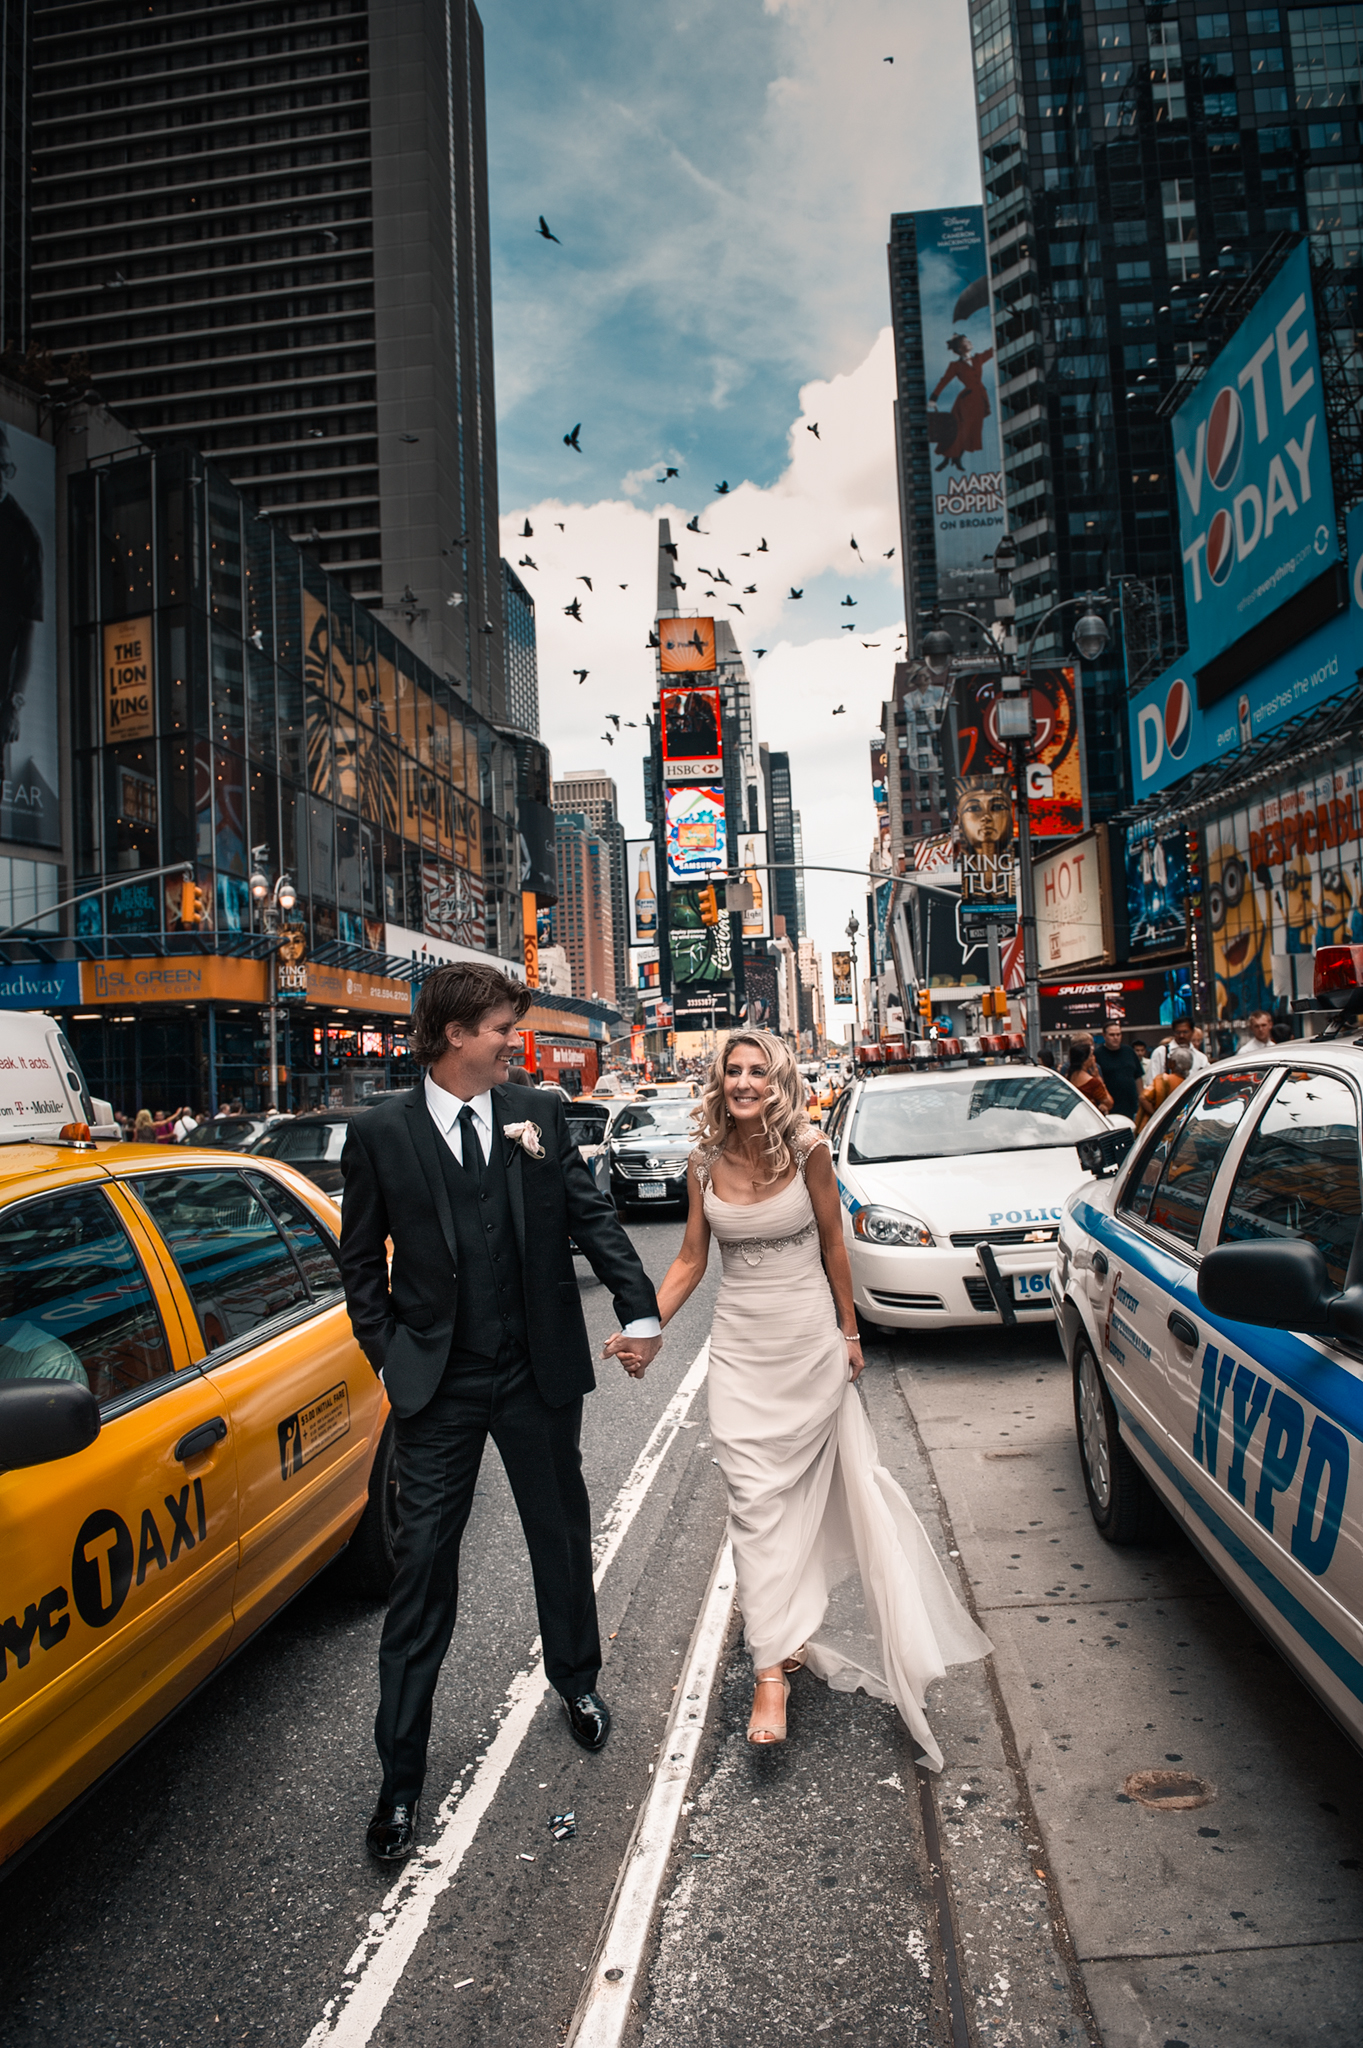 Happy wedding couple walk hand in hand through the streets of New York City between an iconic yellow can and NYPD car